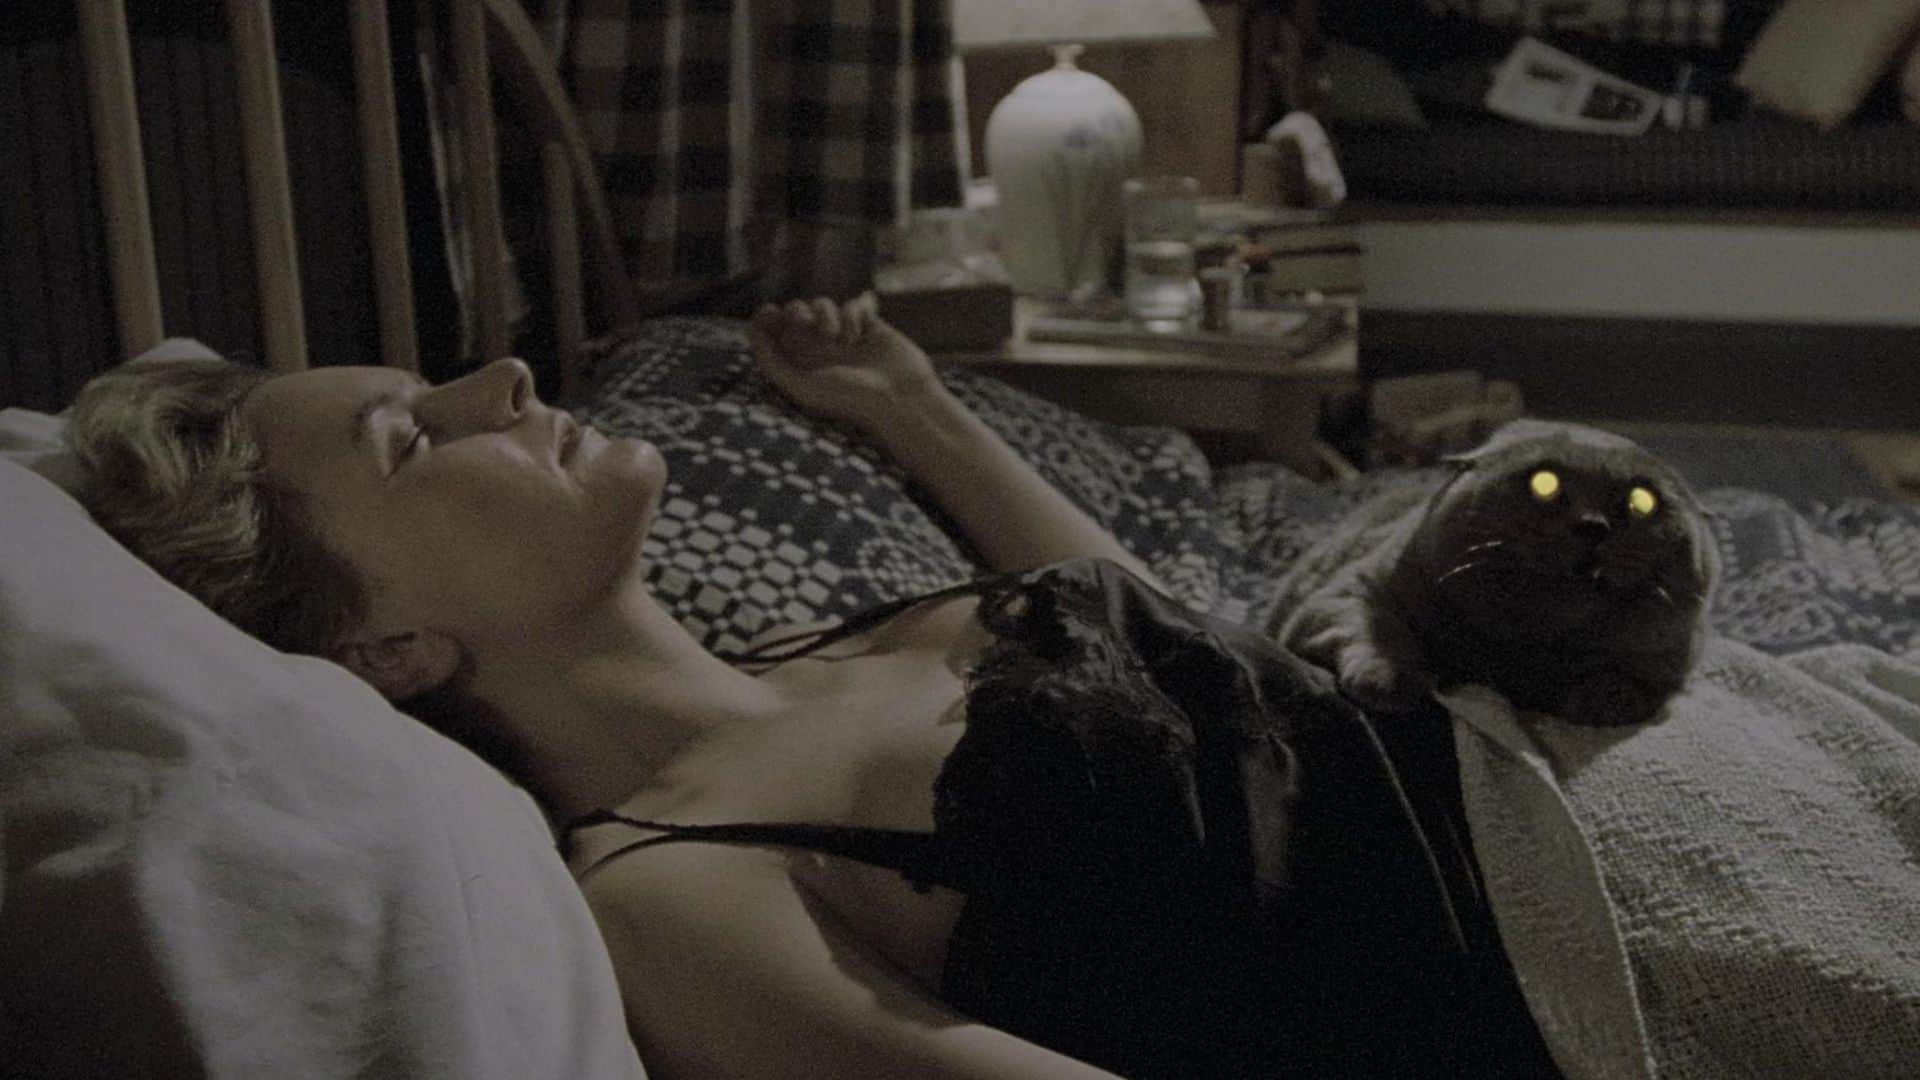 A woman sleeps in bed with a gray cat in this image from Paramount Pictures